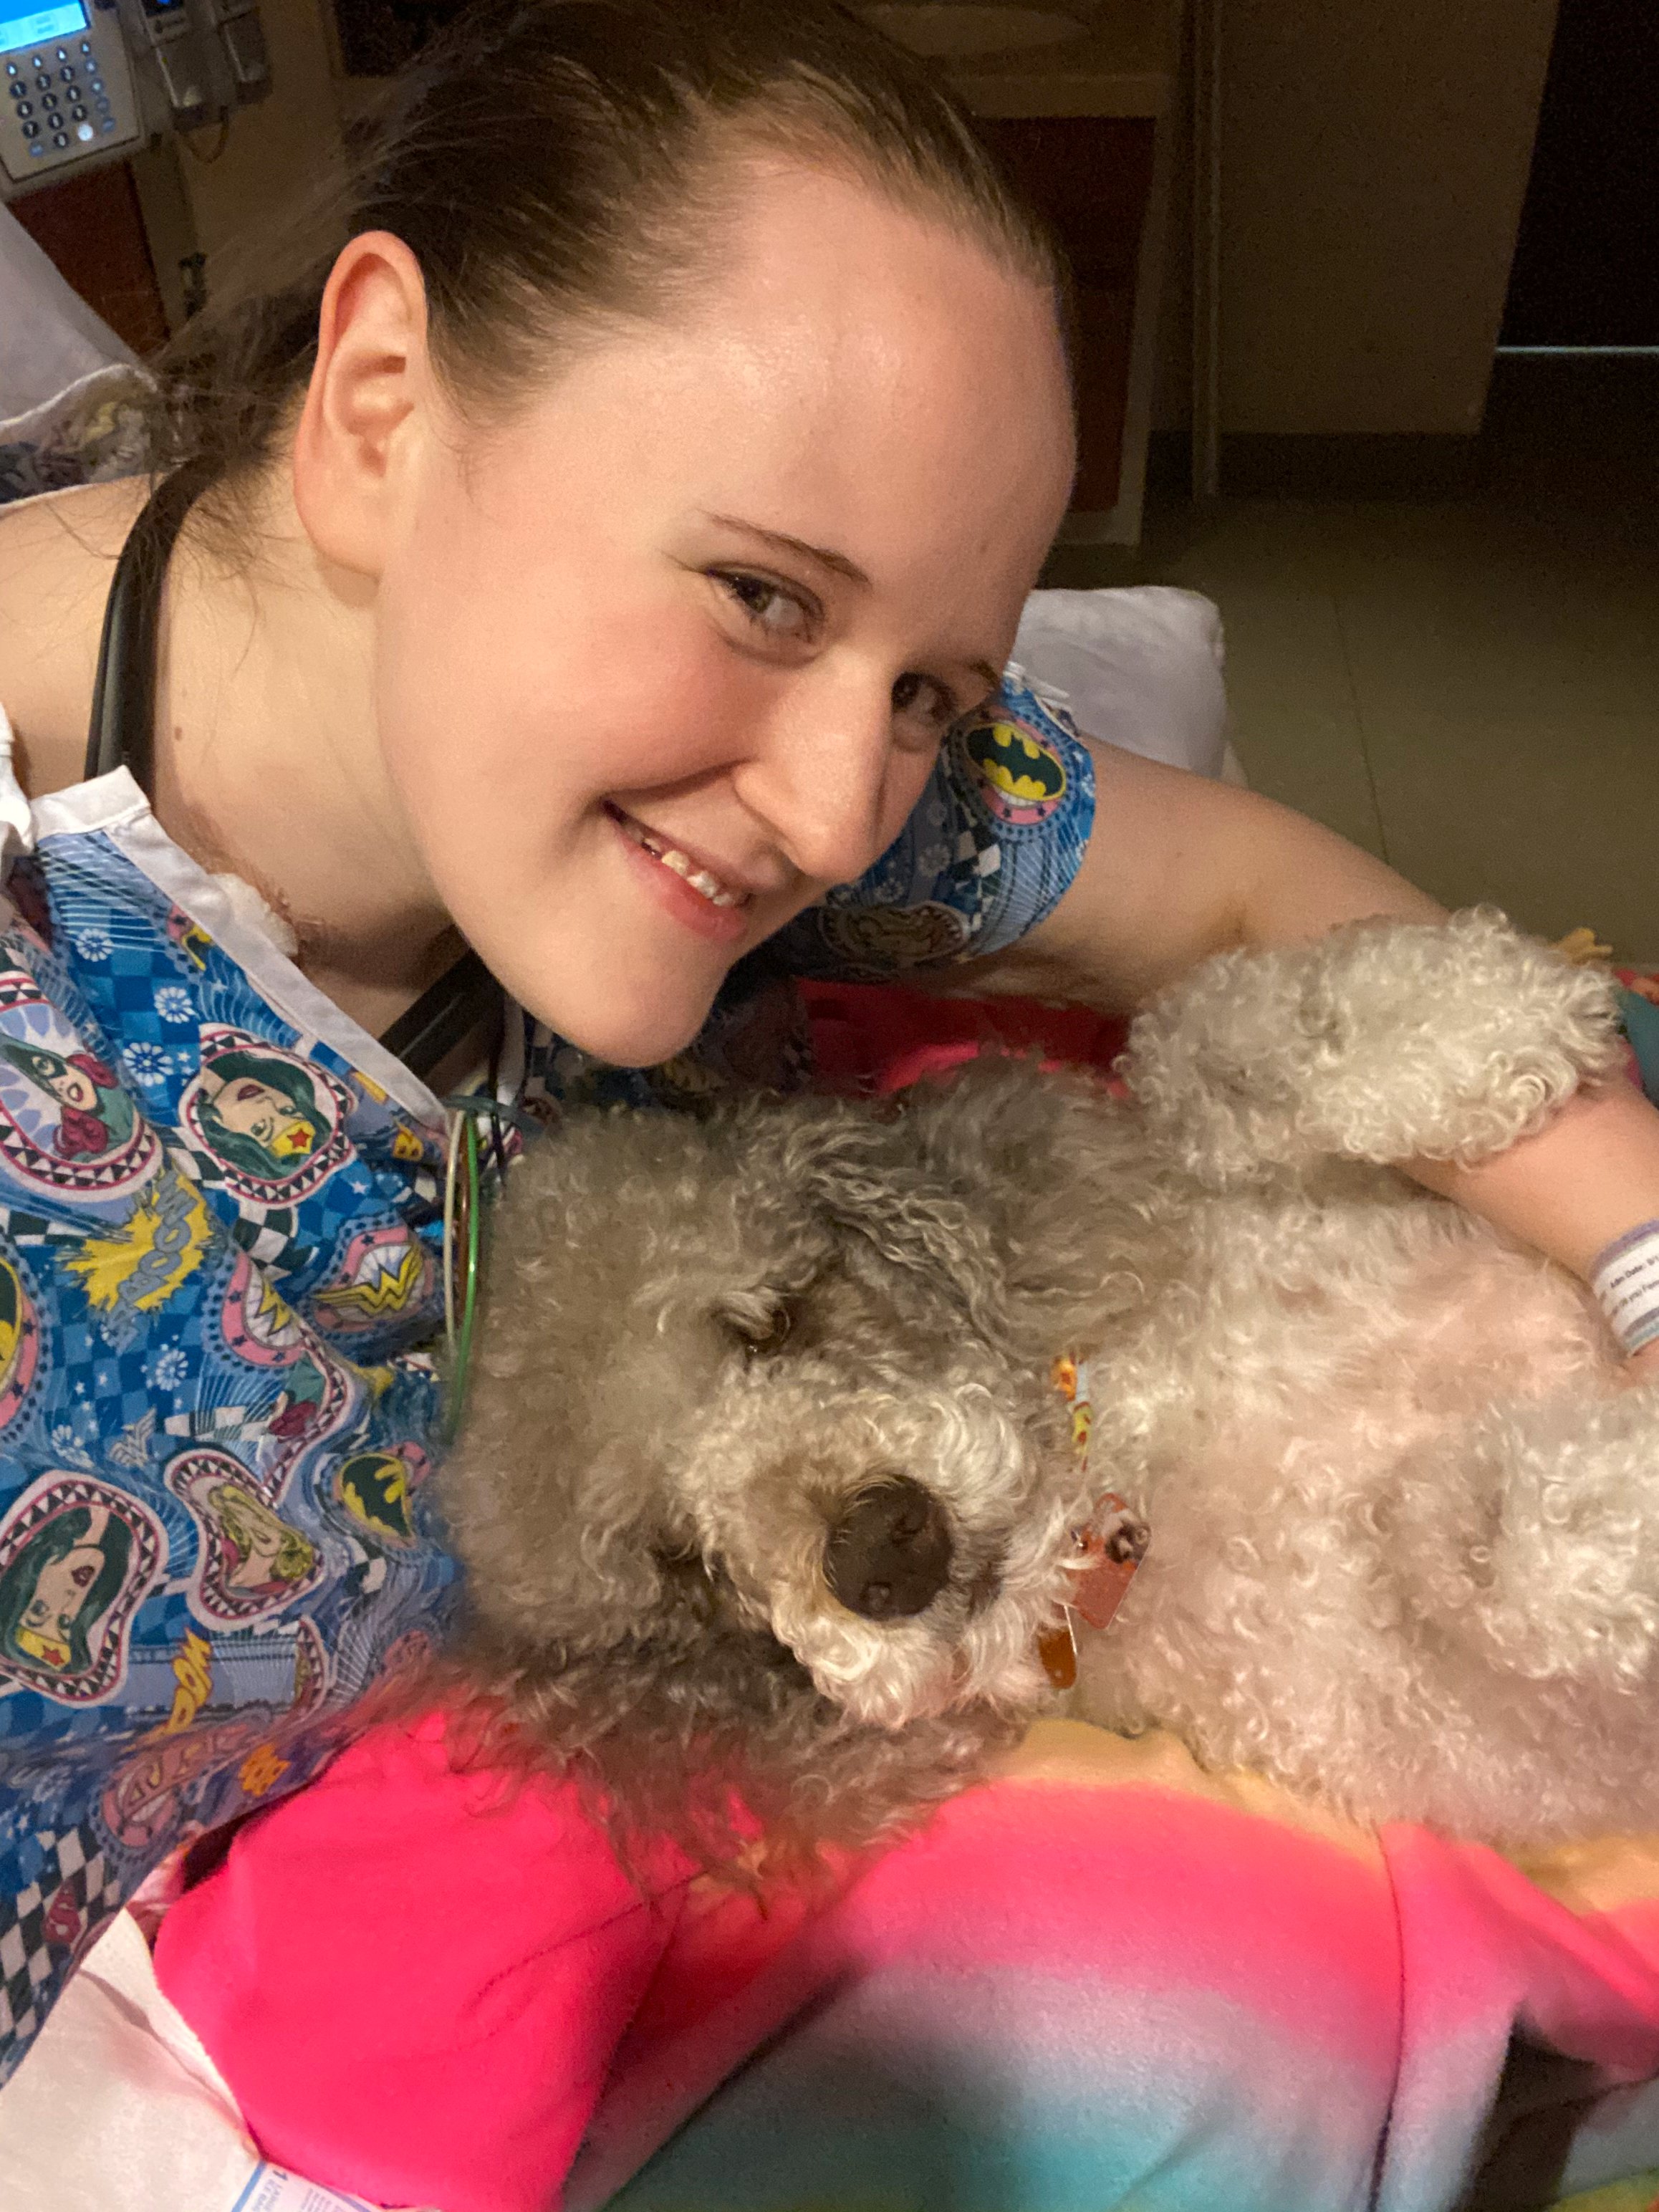 Just a girl and her service dog chillin’ in the hospital :)